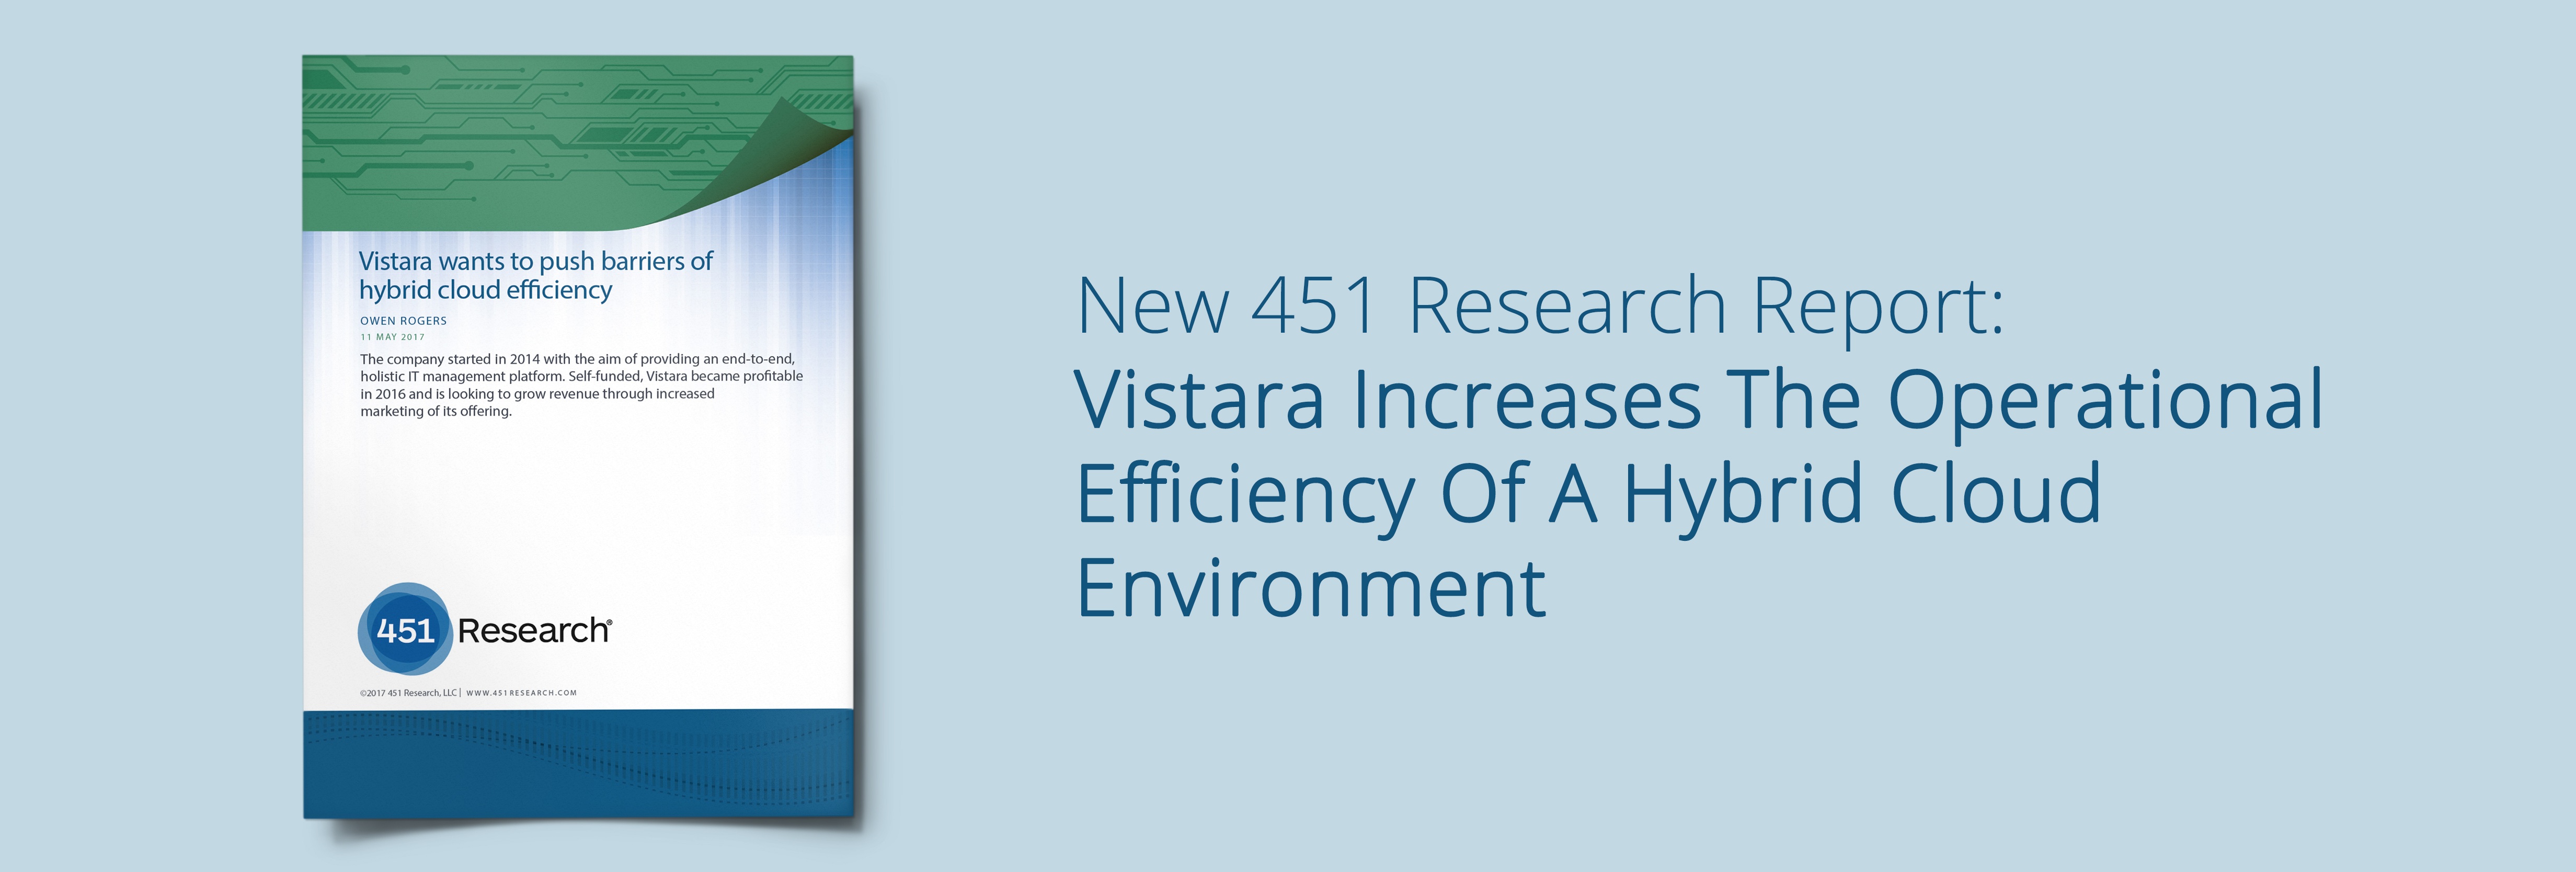 New 451 Research Report: Vistara Increases The Operational Efficiency Of A Hybrid Cloud Environment